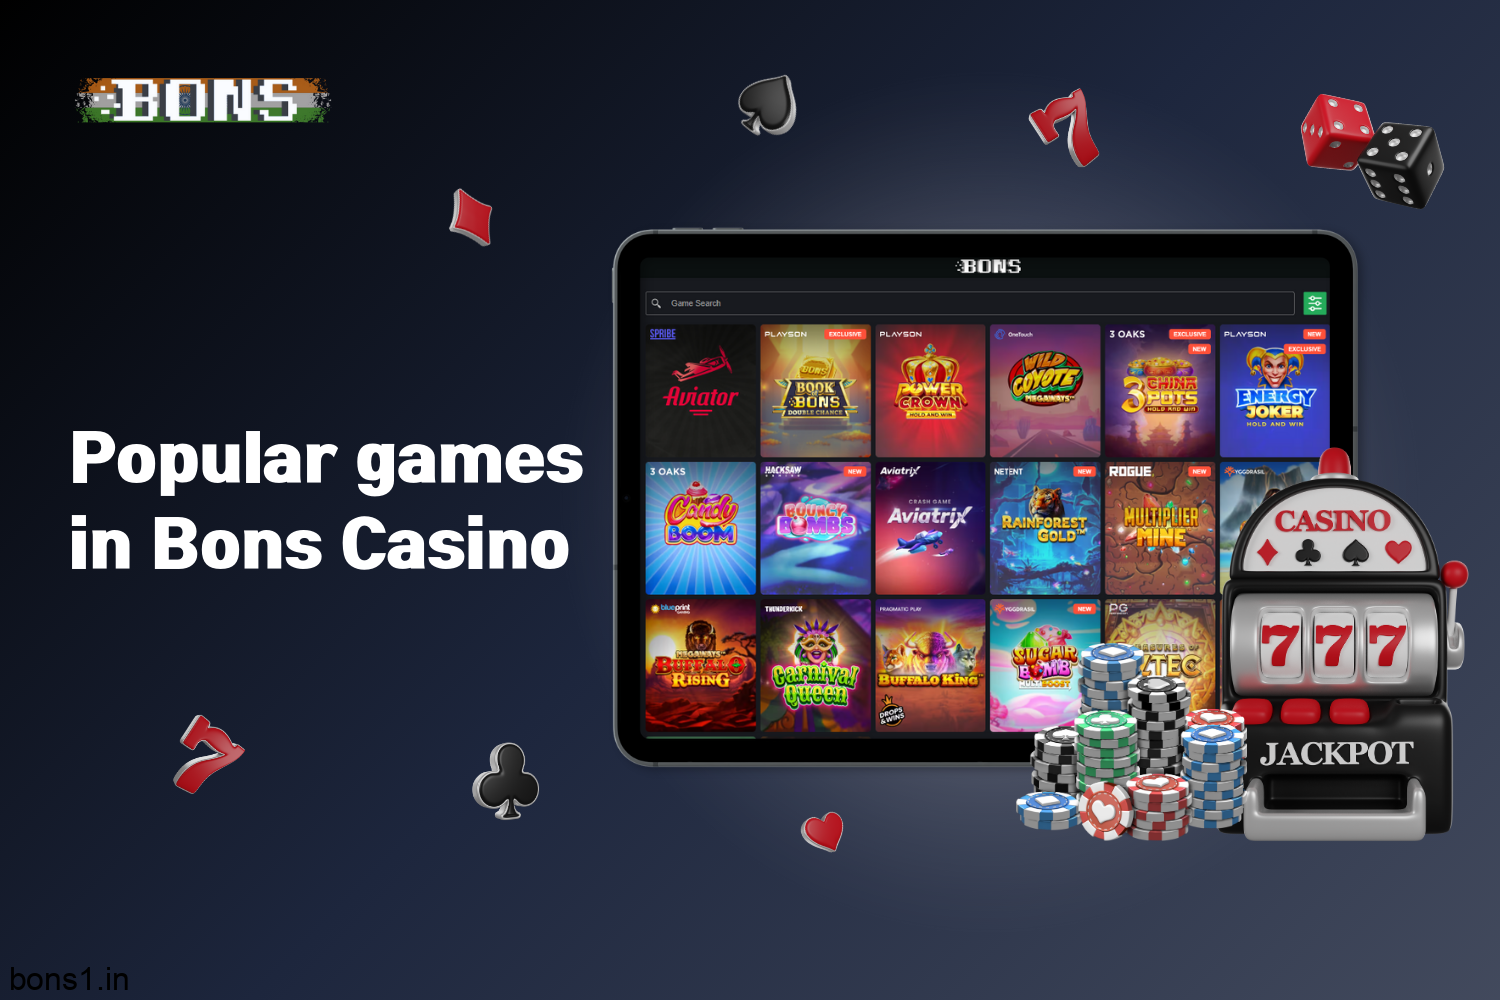 Bons Casino offers popular games for players from India